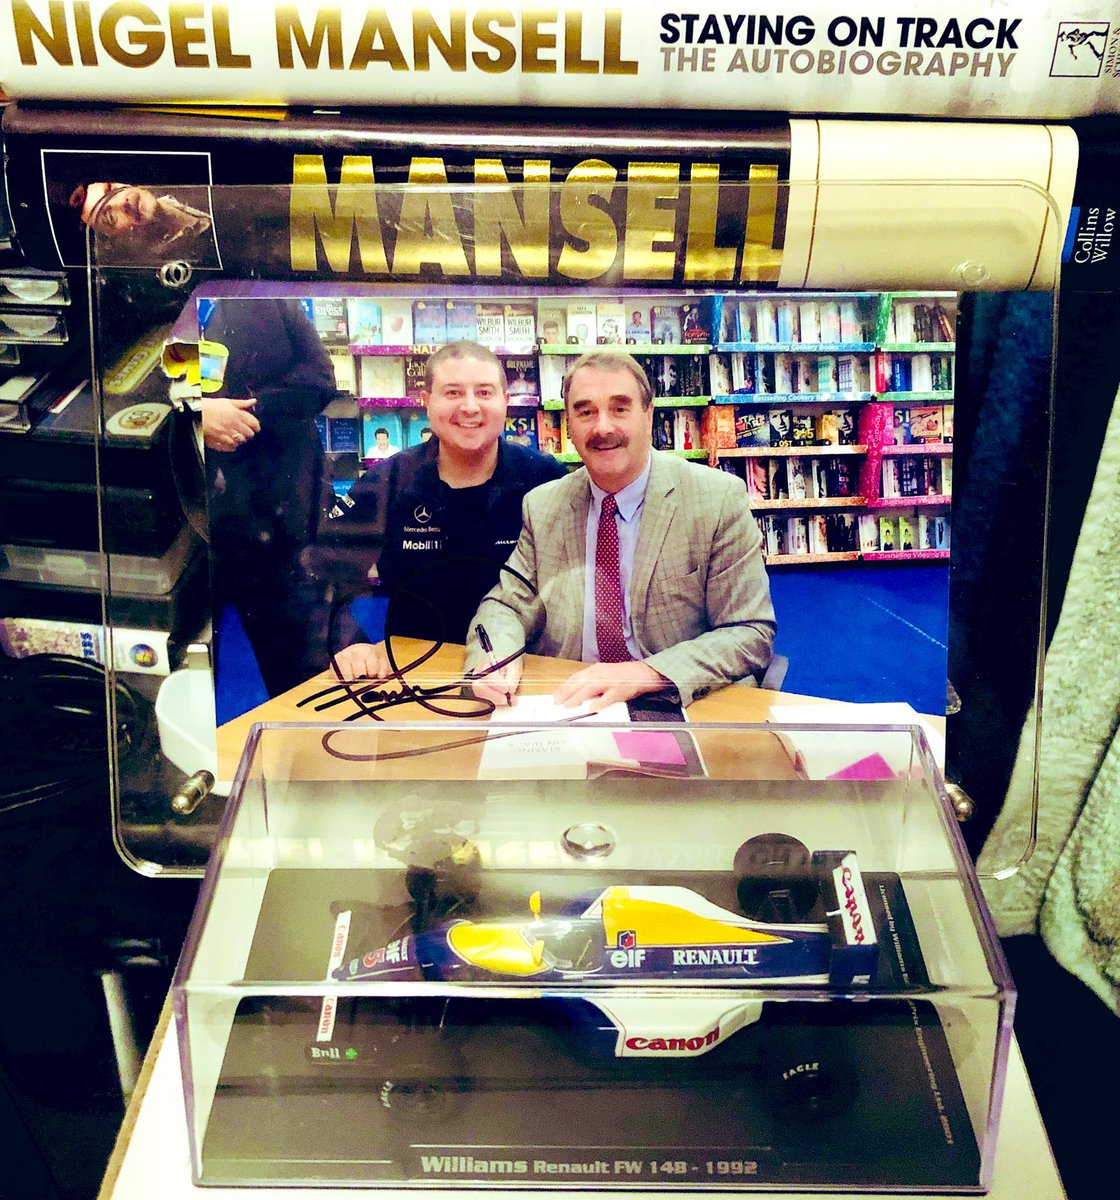 @RaceMemorabilia @nigelmansell @formulaart @SilverstoneUK Amazing prize — it’d be a fantastic addition to my Mansell collection!

#MansellMania 👨🏻🇬🇧